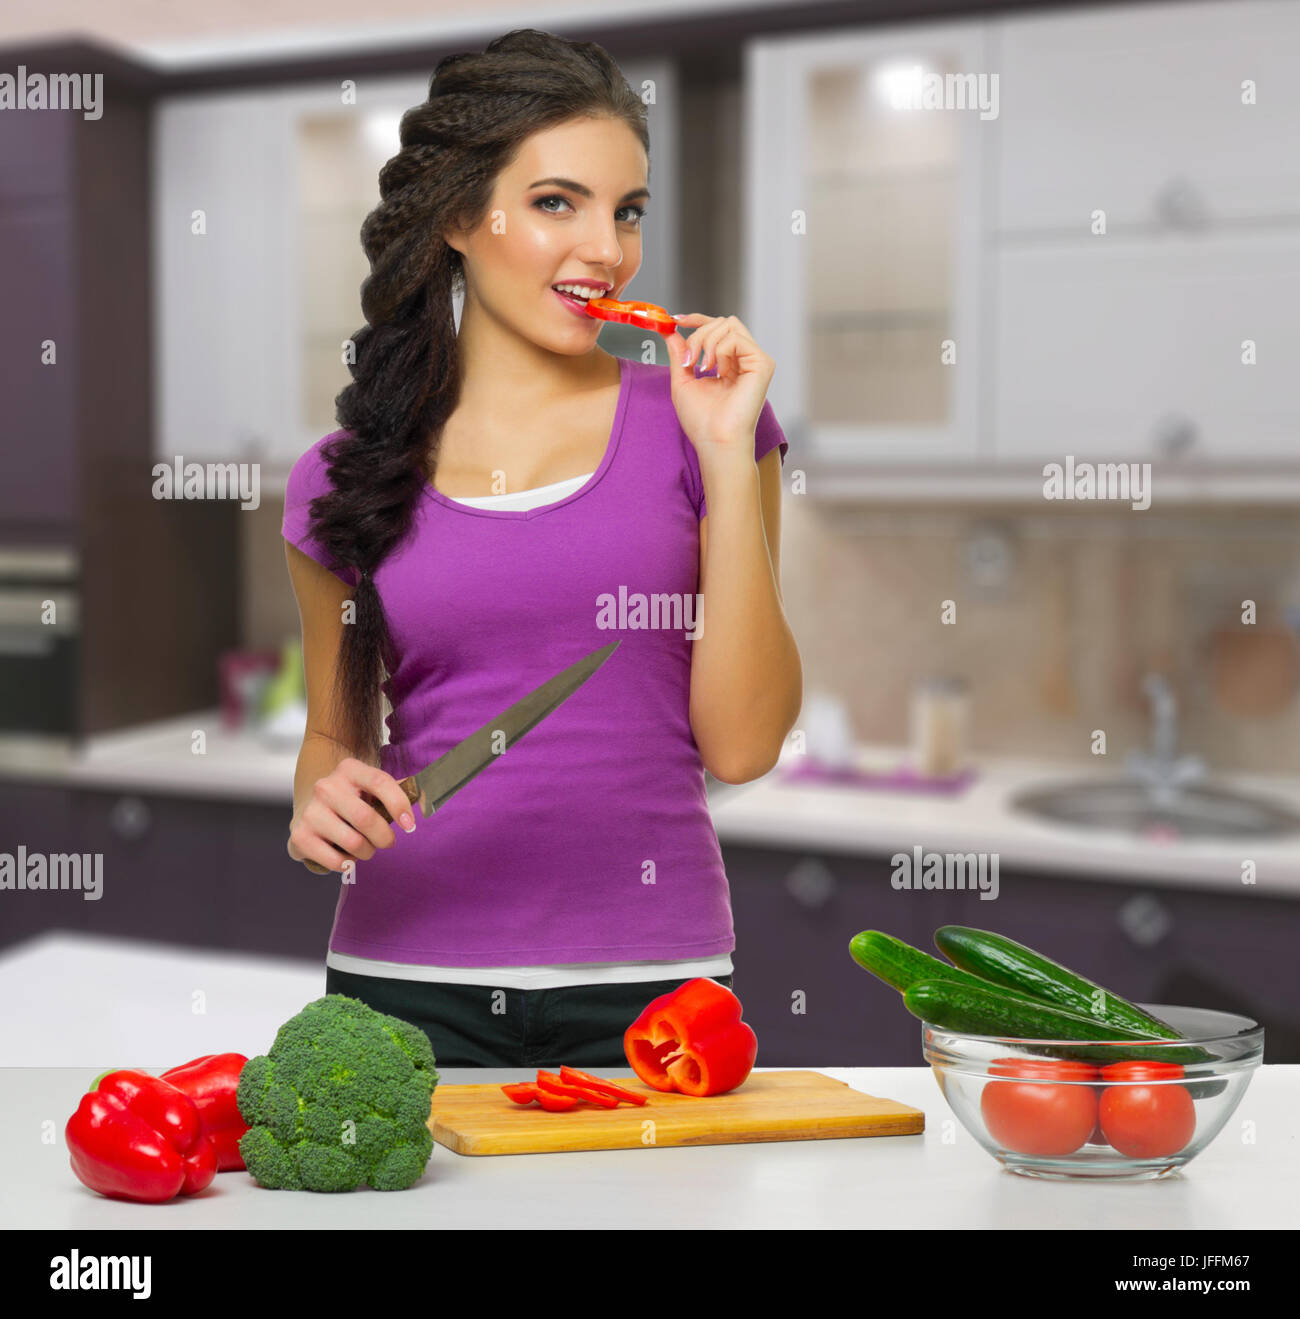 Young cooking woman at kitchen Stock Photo